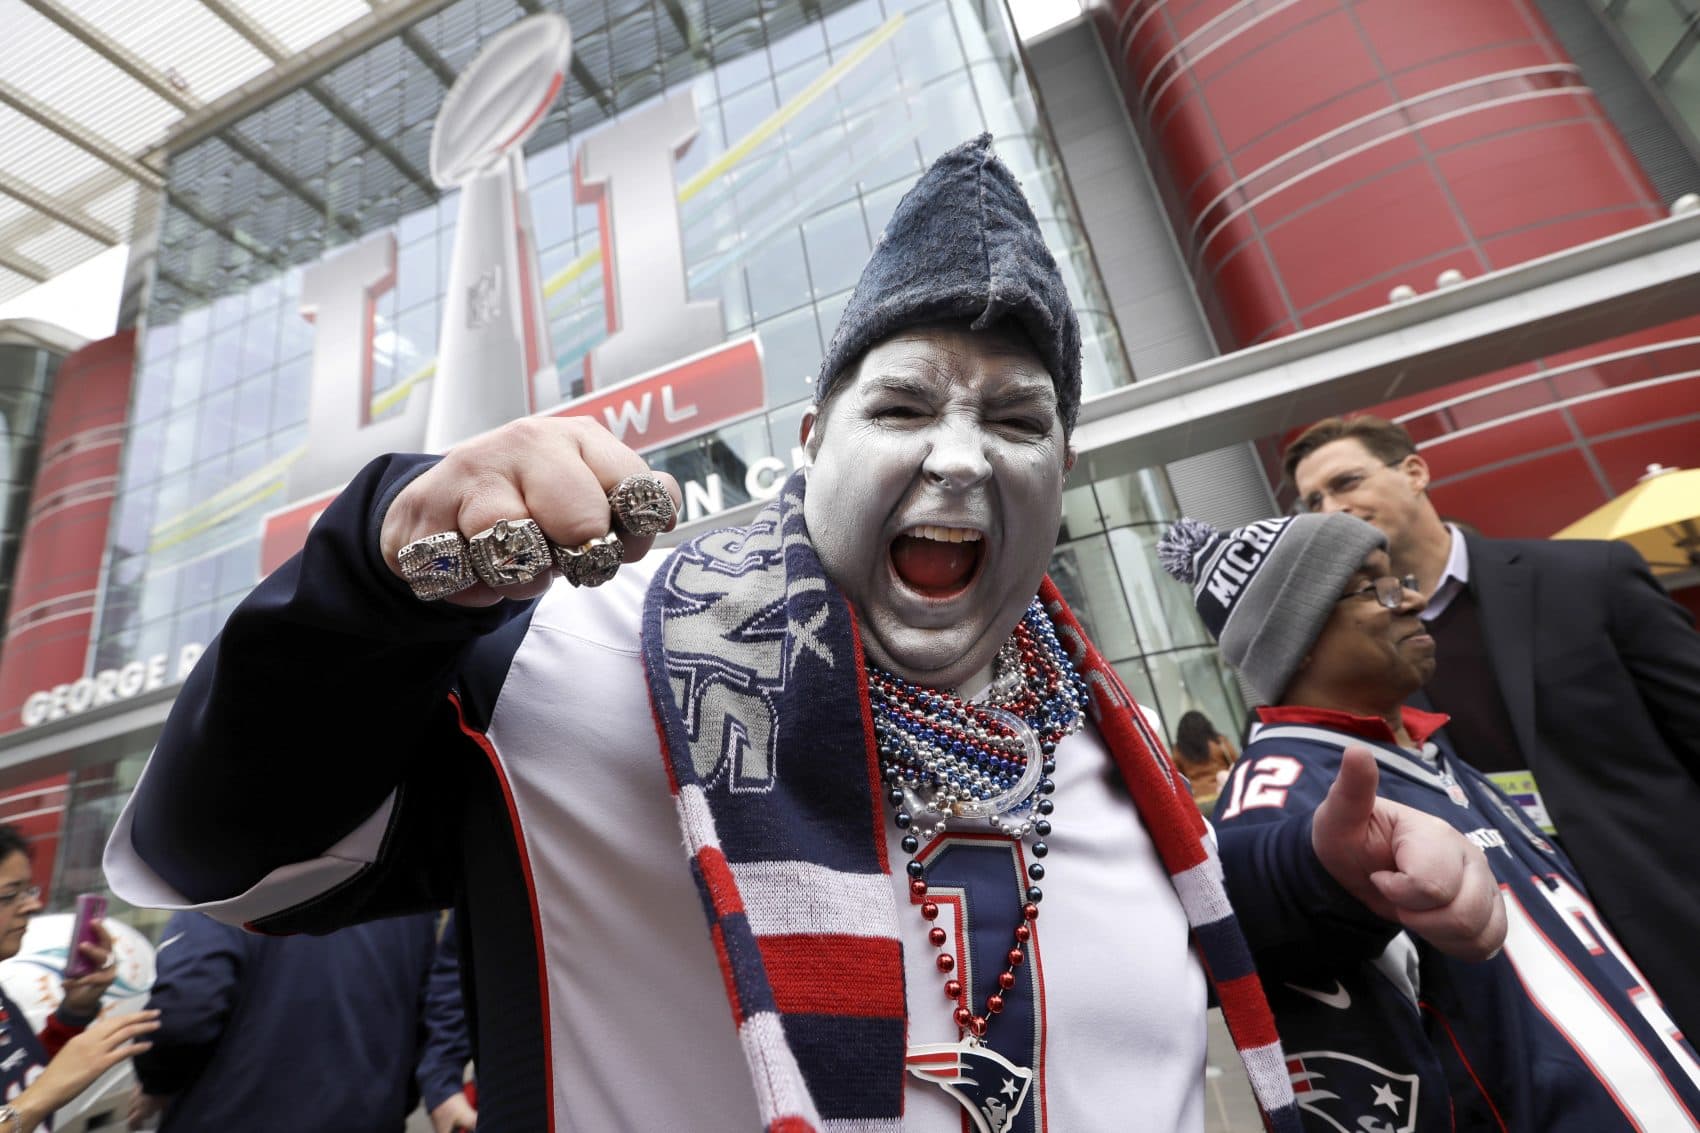 New England Patriots fan Keith Birchall cheers for his team outside the NFL Experience for Super Bowl LI. (David J. Phillip/AP)